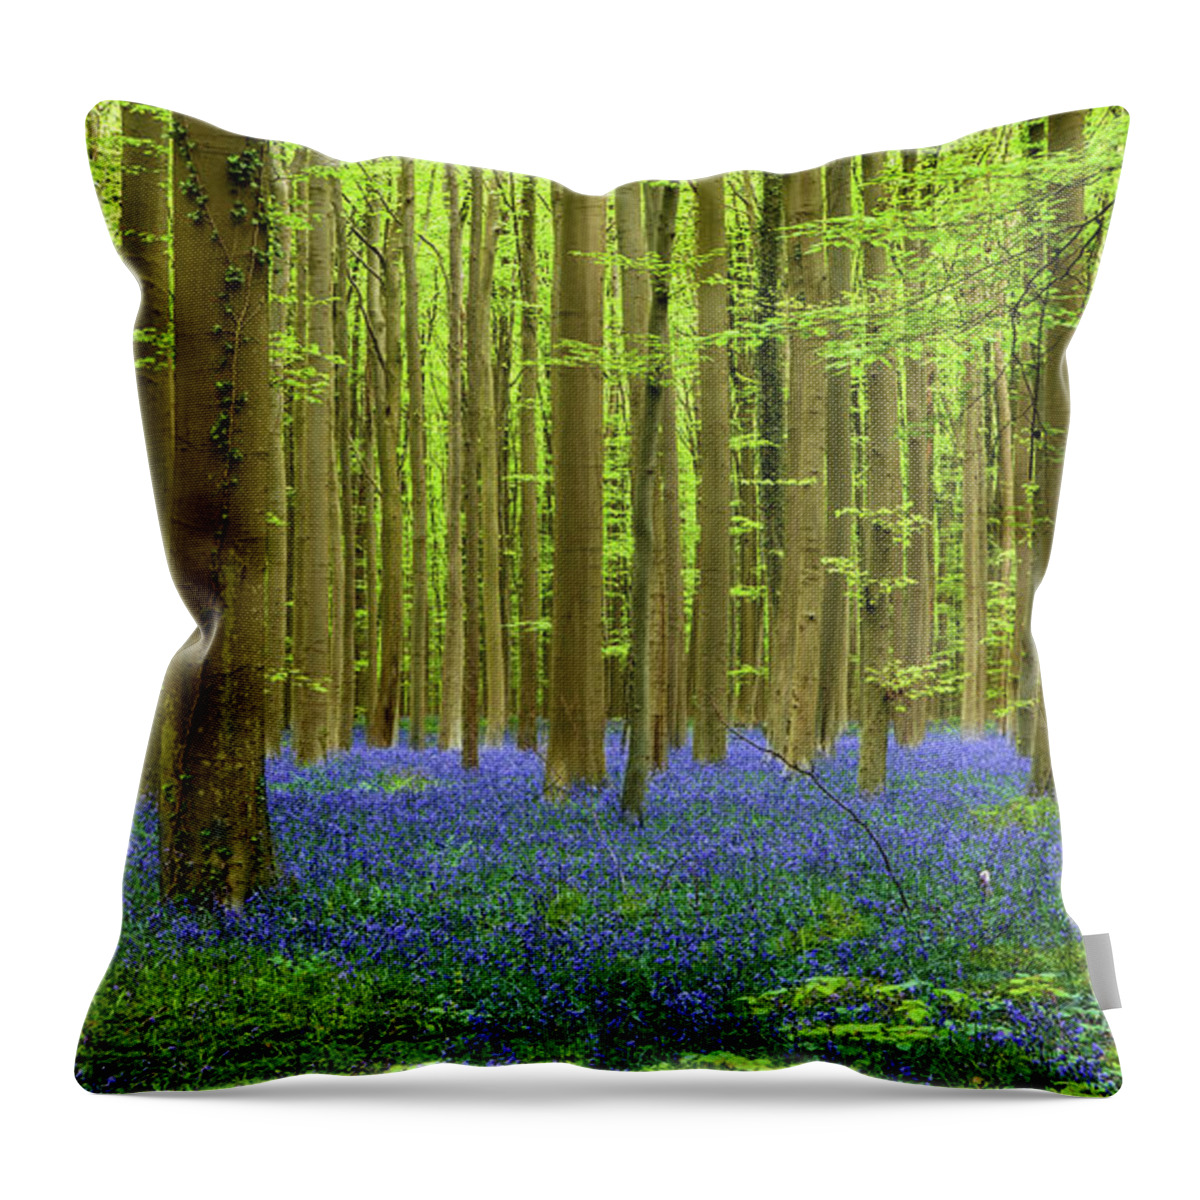 Bluebells Throw Pillow featuring the photograph Peaceful sight by Jorge Maia